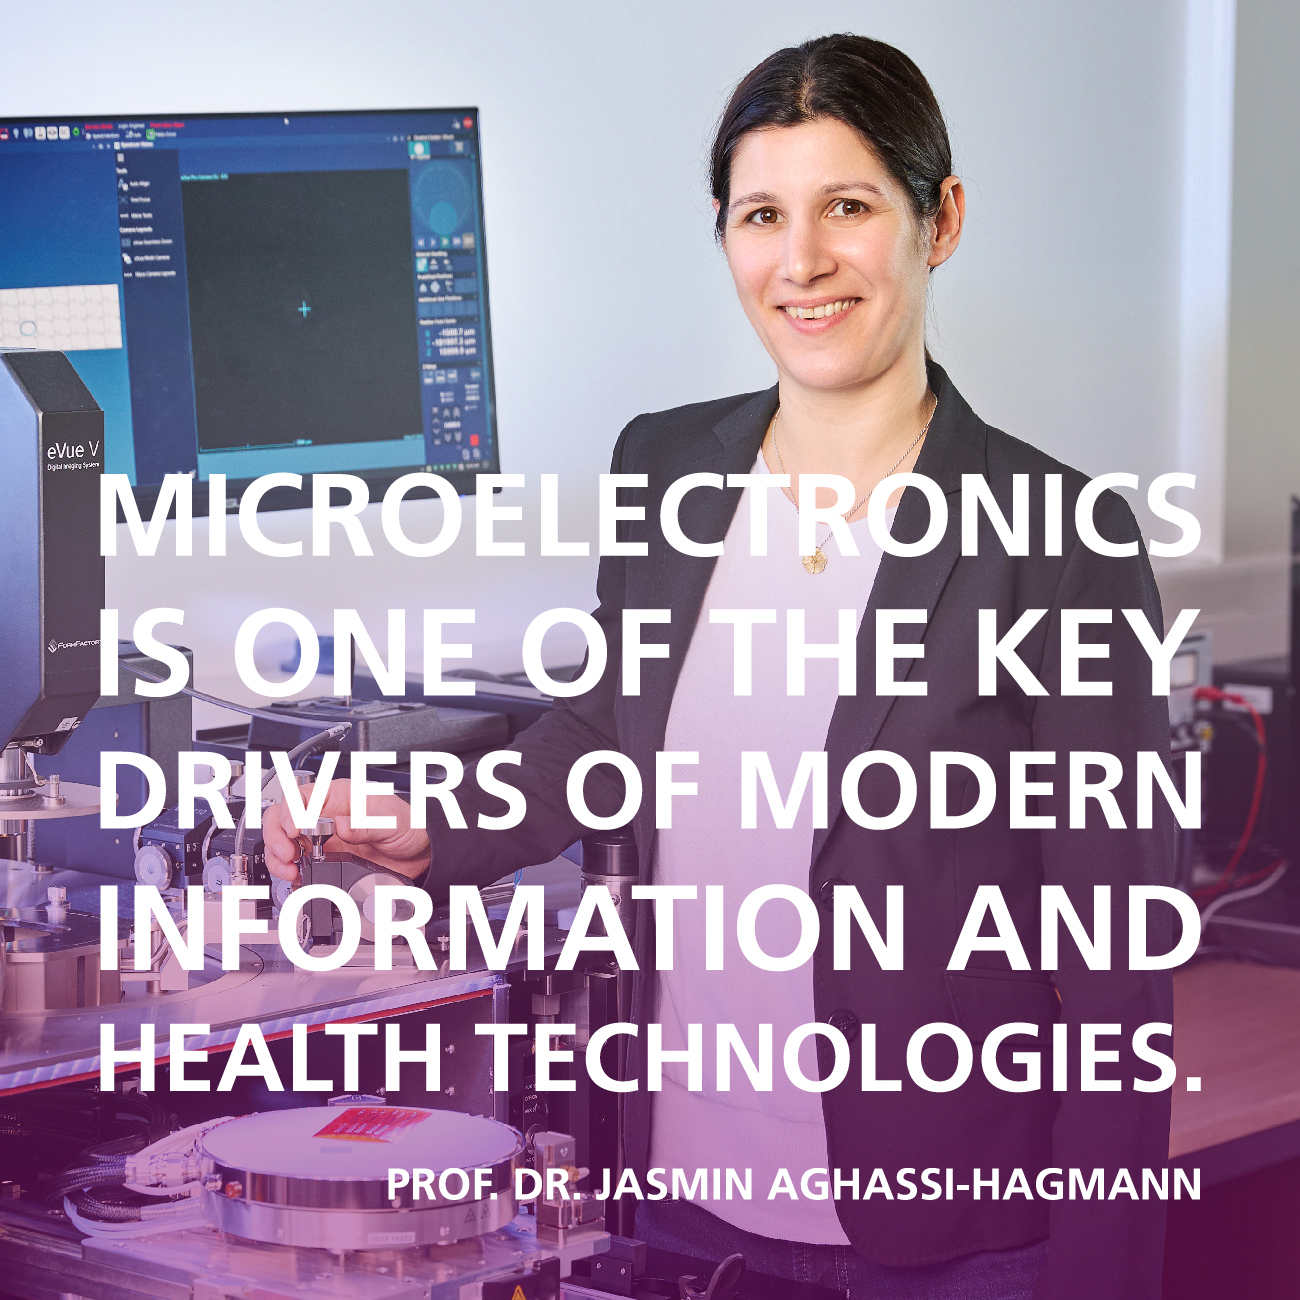 Microelectronics is one of the key drivers of modern information and health technologies. Quote by Prof. Dr. Jasmin Aghassi-Hagmann, Division 3, KIT 